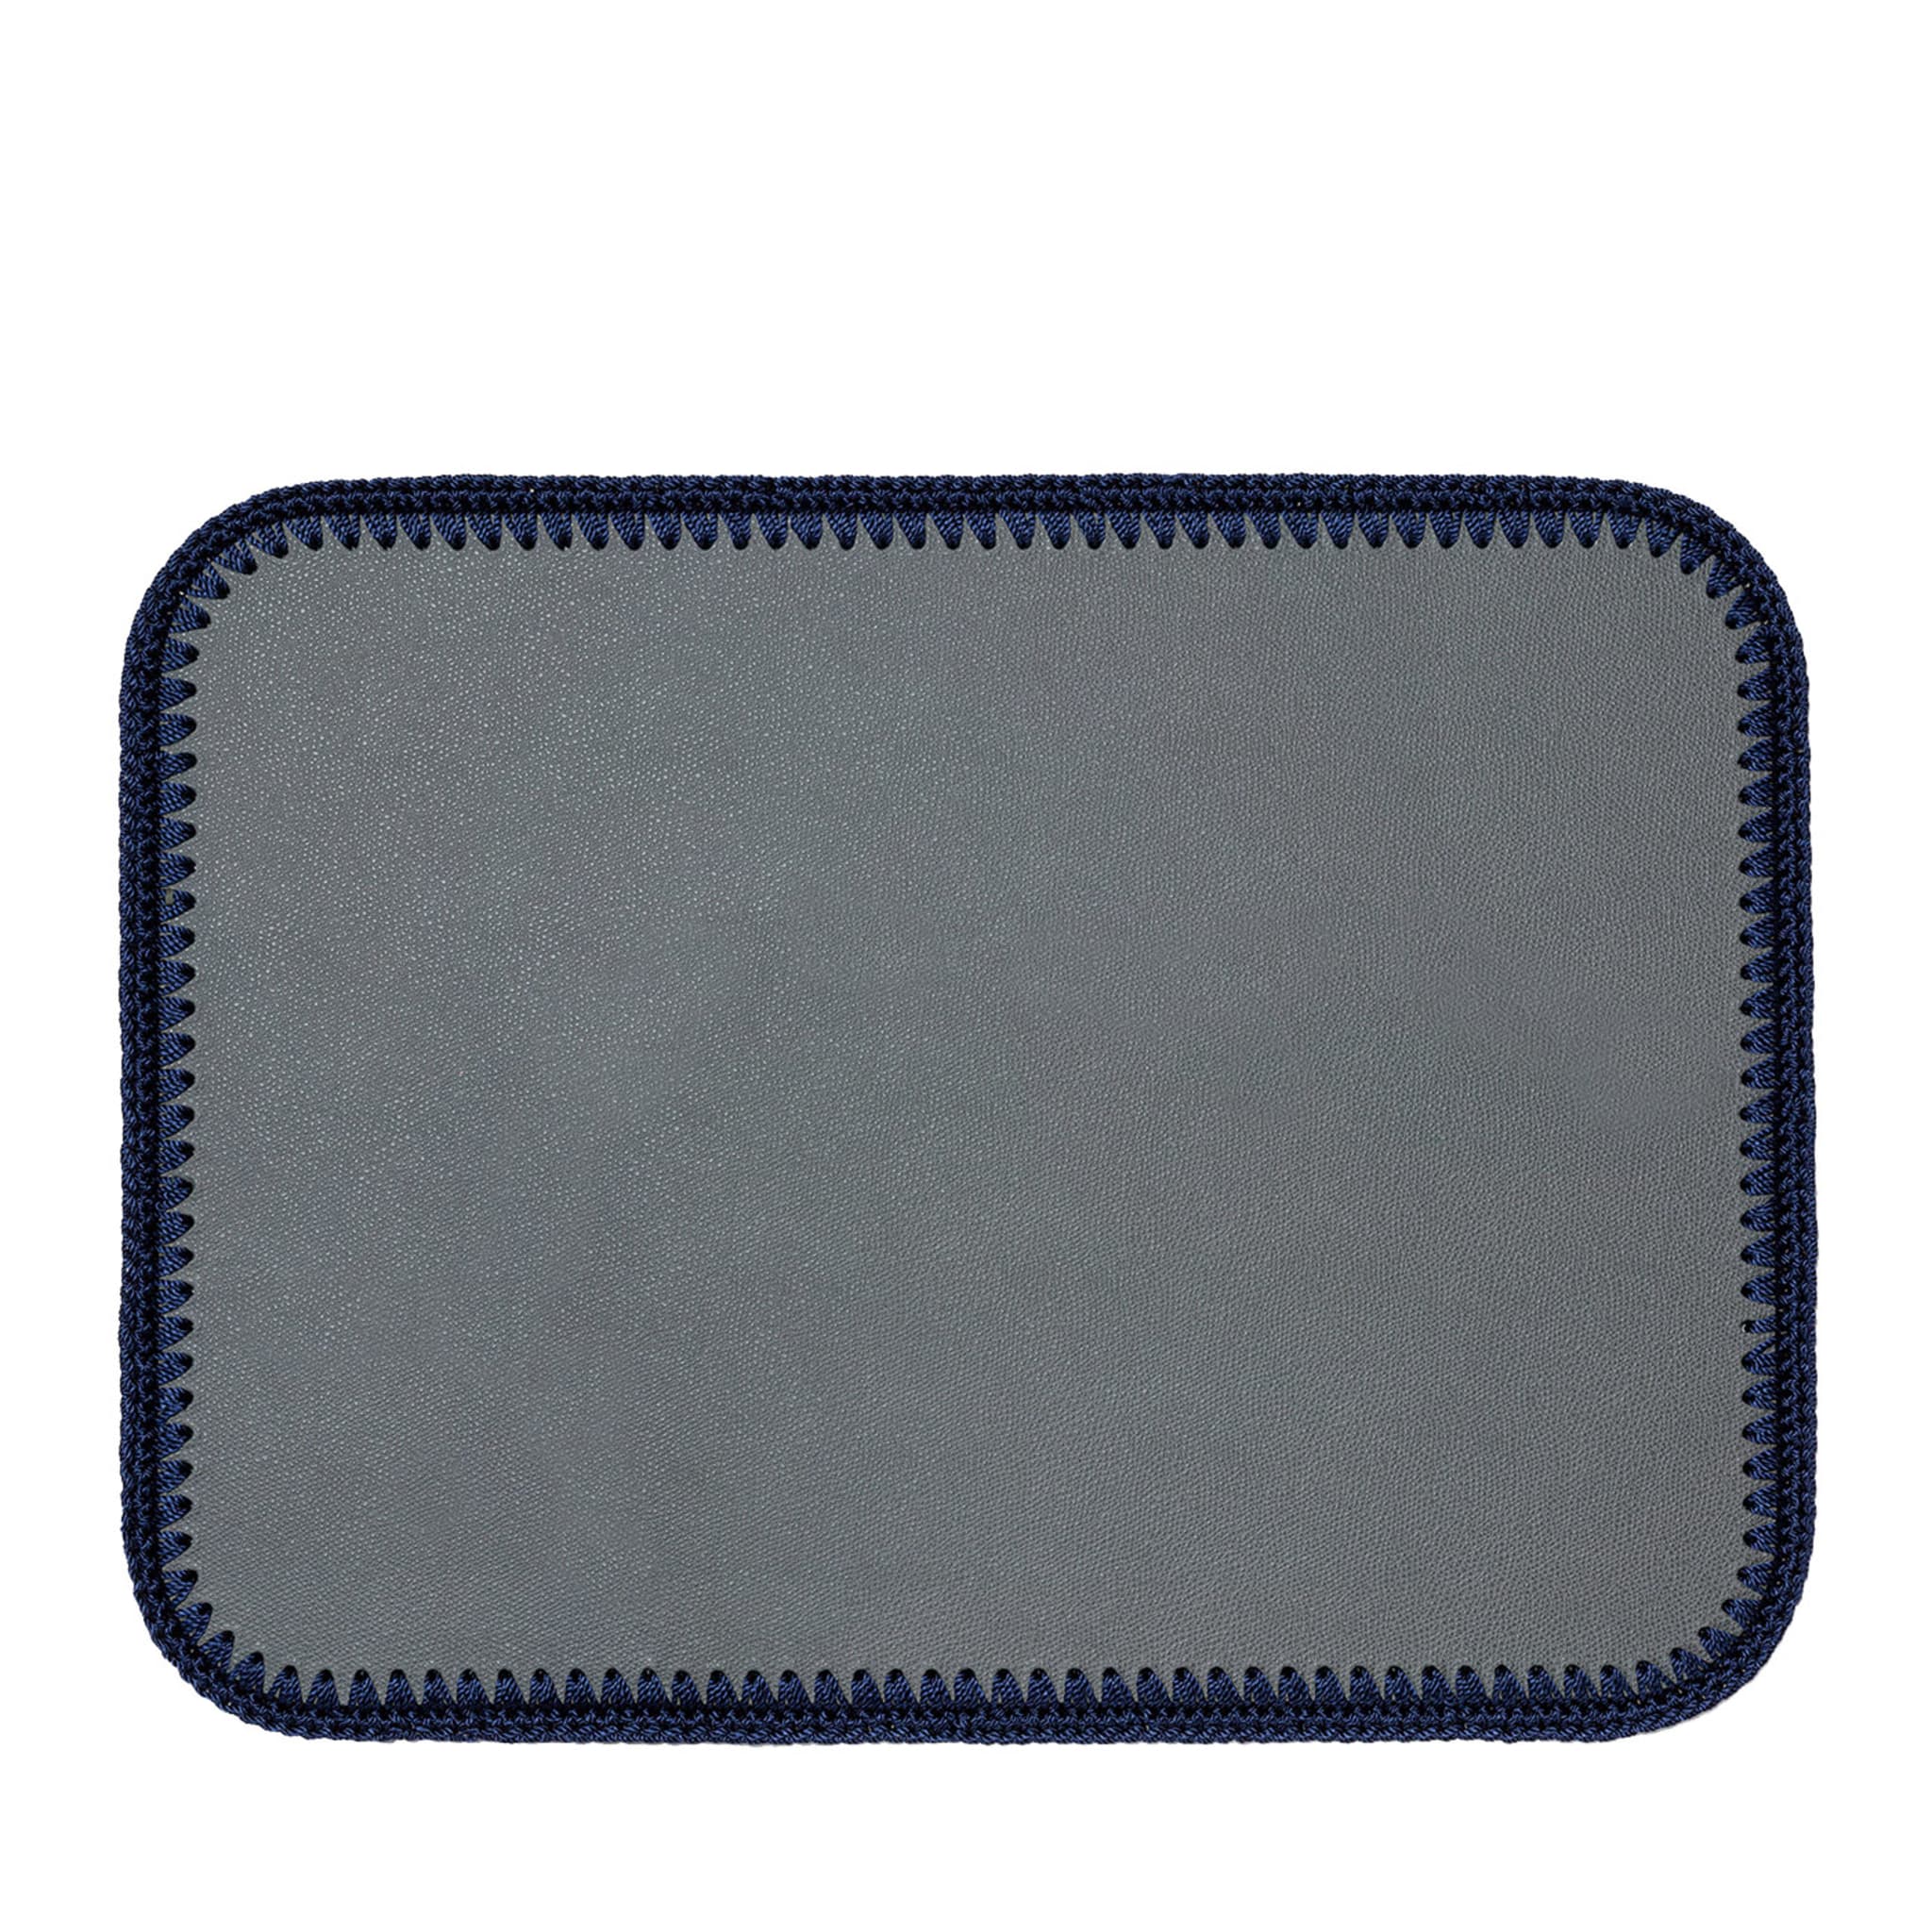 Rochelle Leather & Crochet Placemats Rectangular - Gray & Blue #1 - Main view